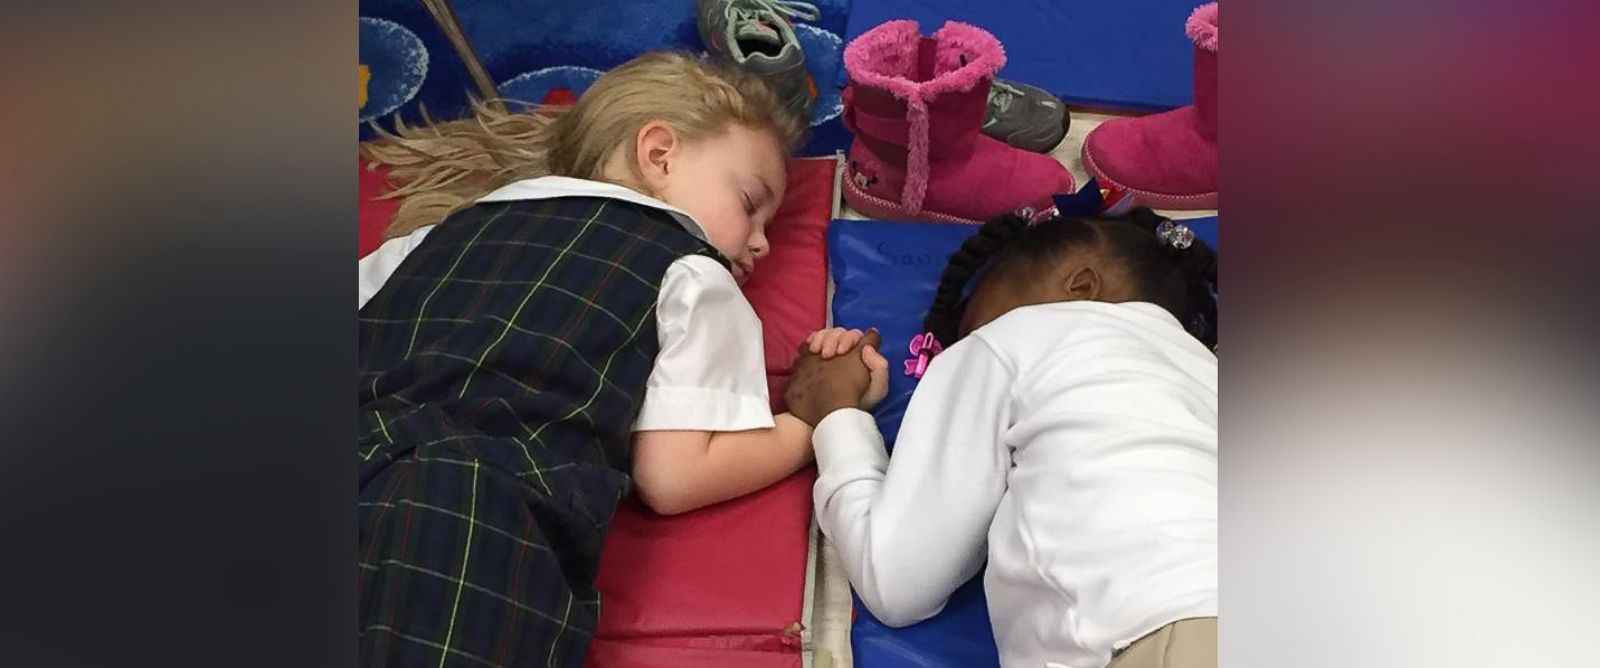 PHOTO: A teacher captured a tender moment in a photo taken during two kindergartners nap time at Presbyterian Day School in Clarksdale, Mississippi.